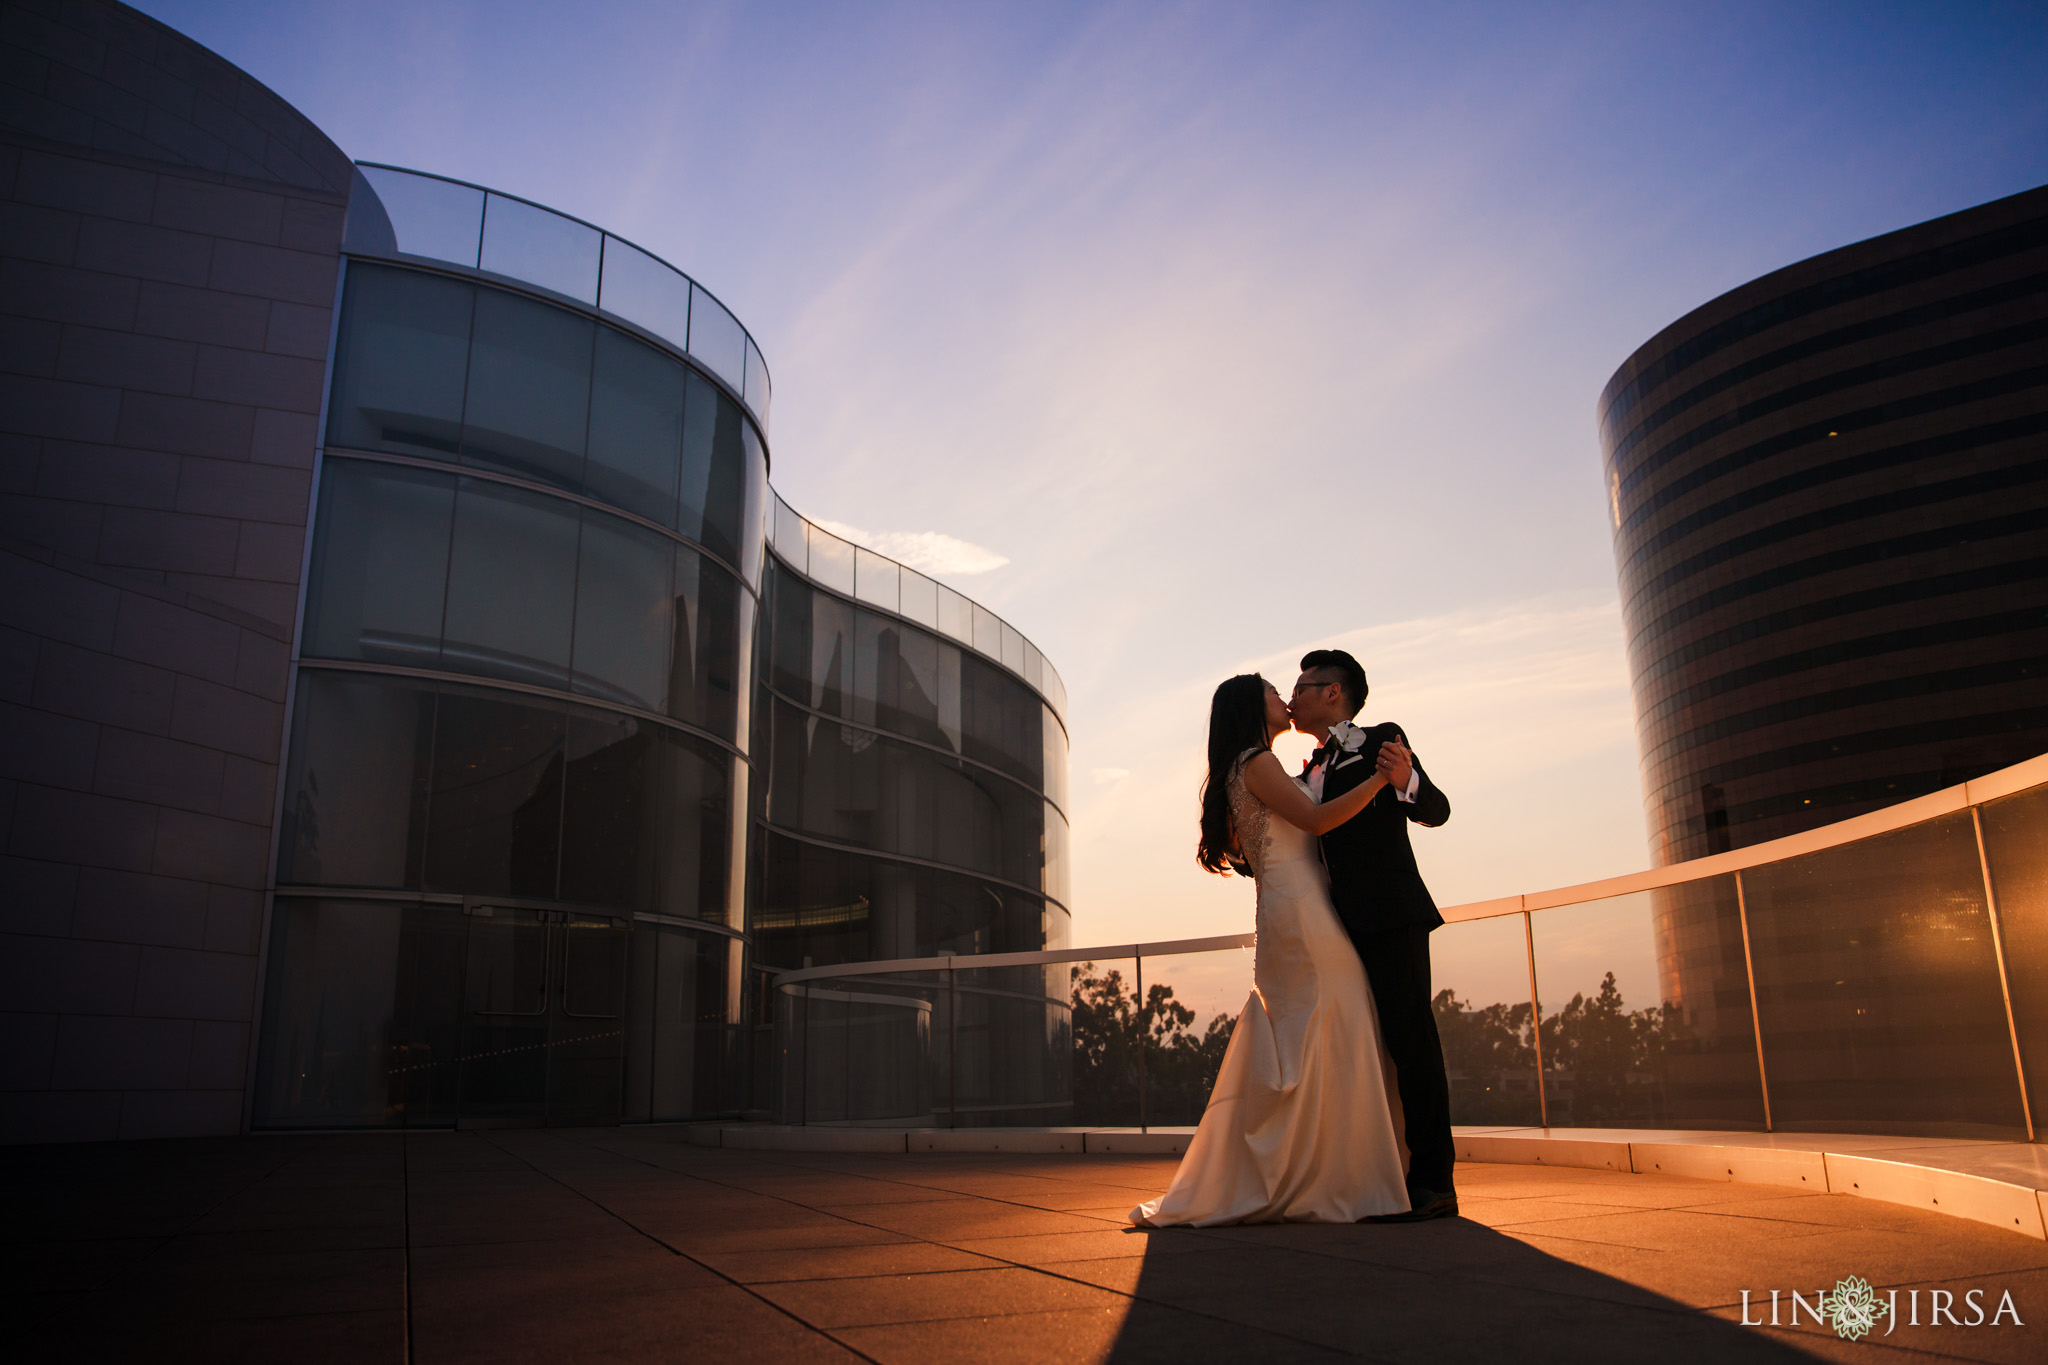 30 segerstrom center for the arts costa mesa wedding photography